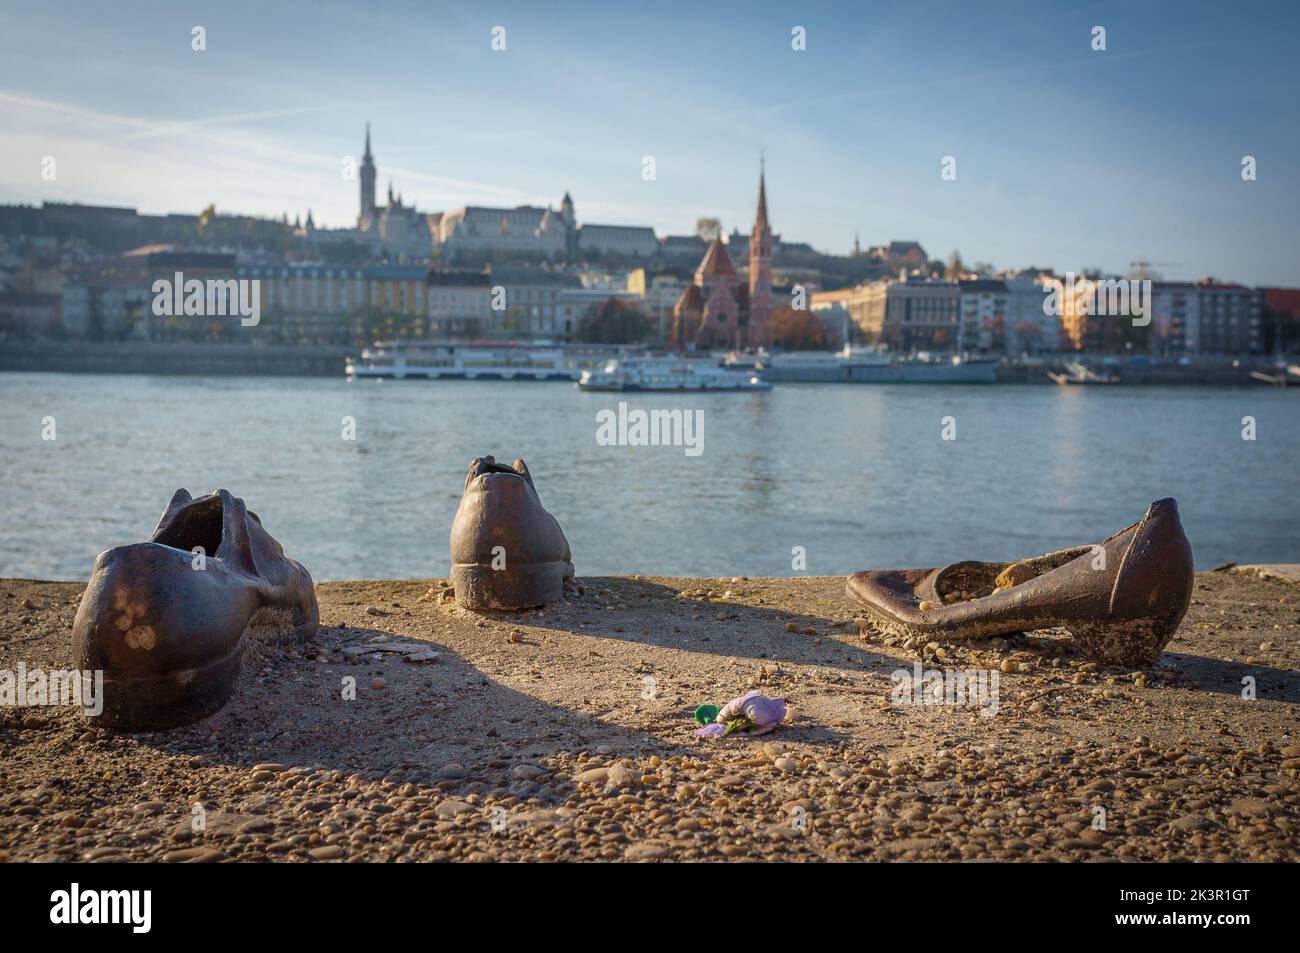 The Iron shoes memorial for Jewish people executed during the WW2 in Budapest in front of a river Stock Photo